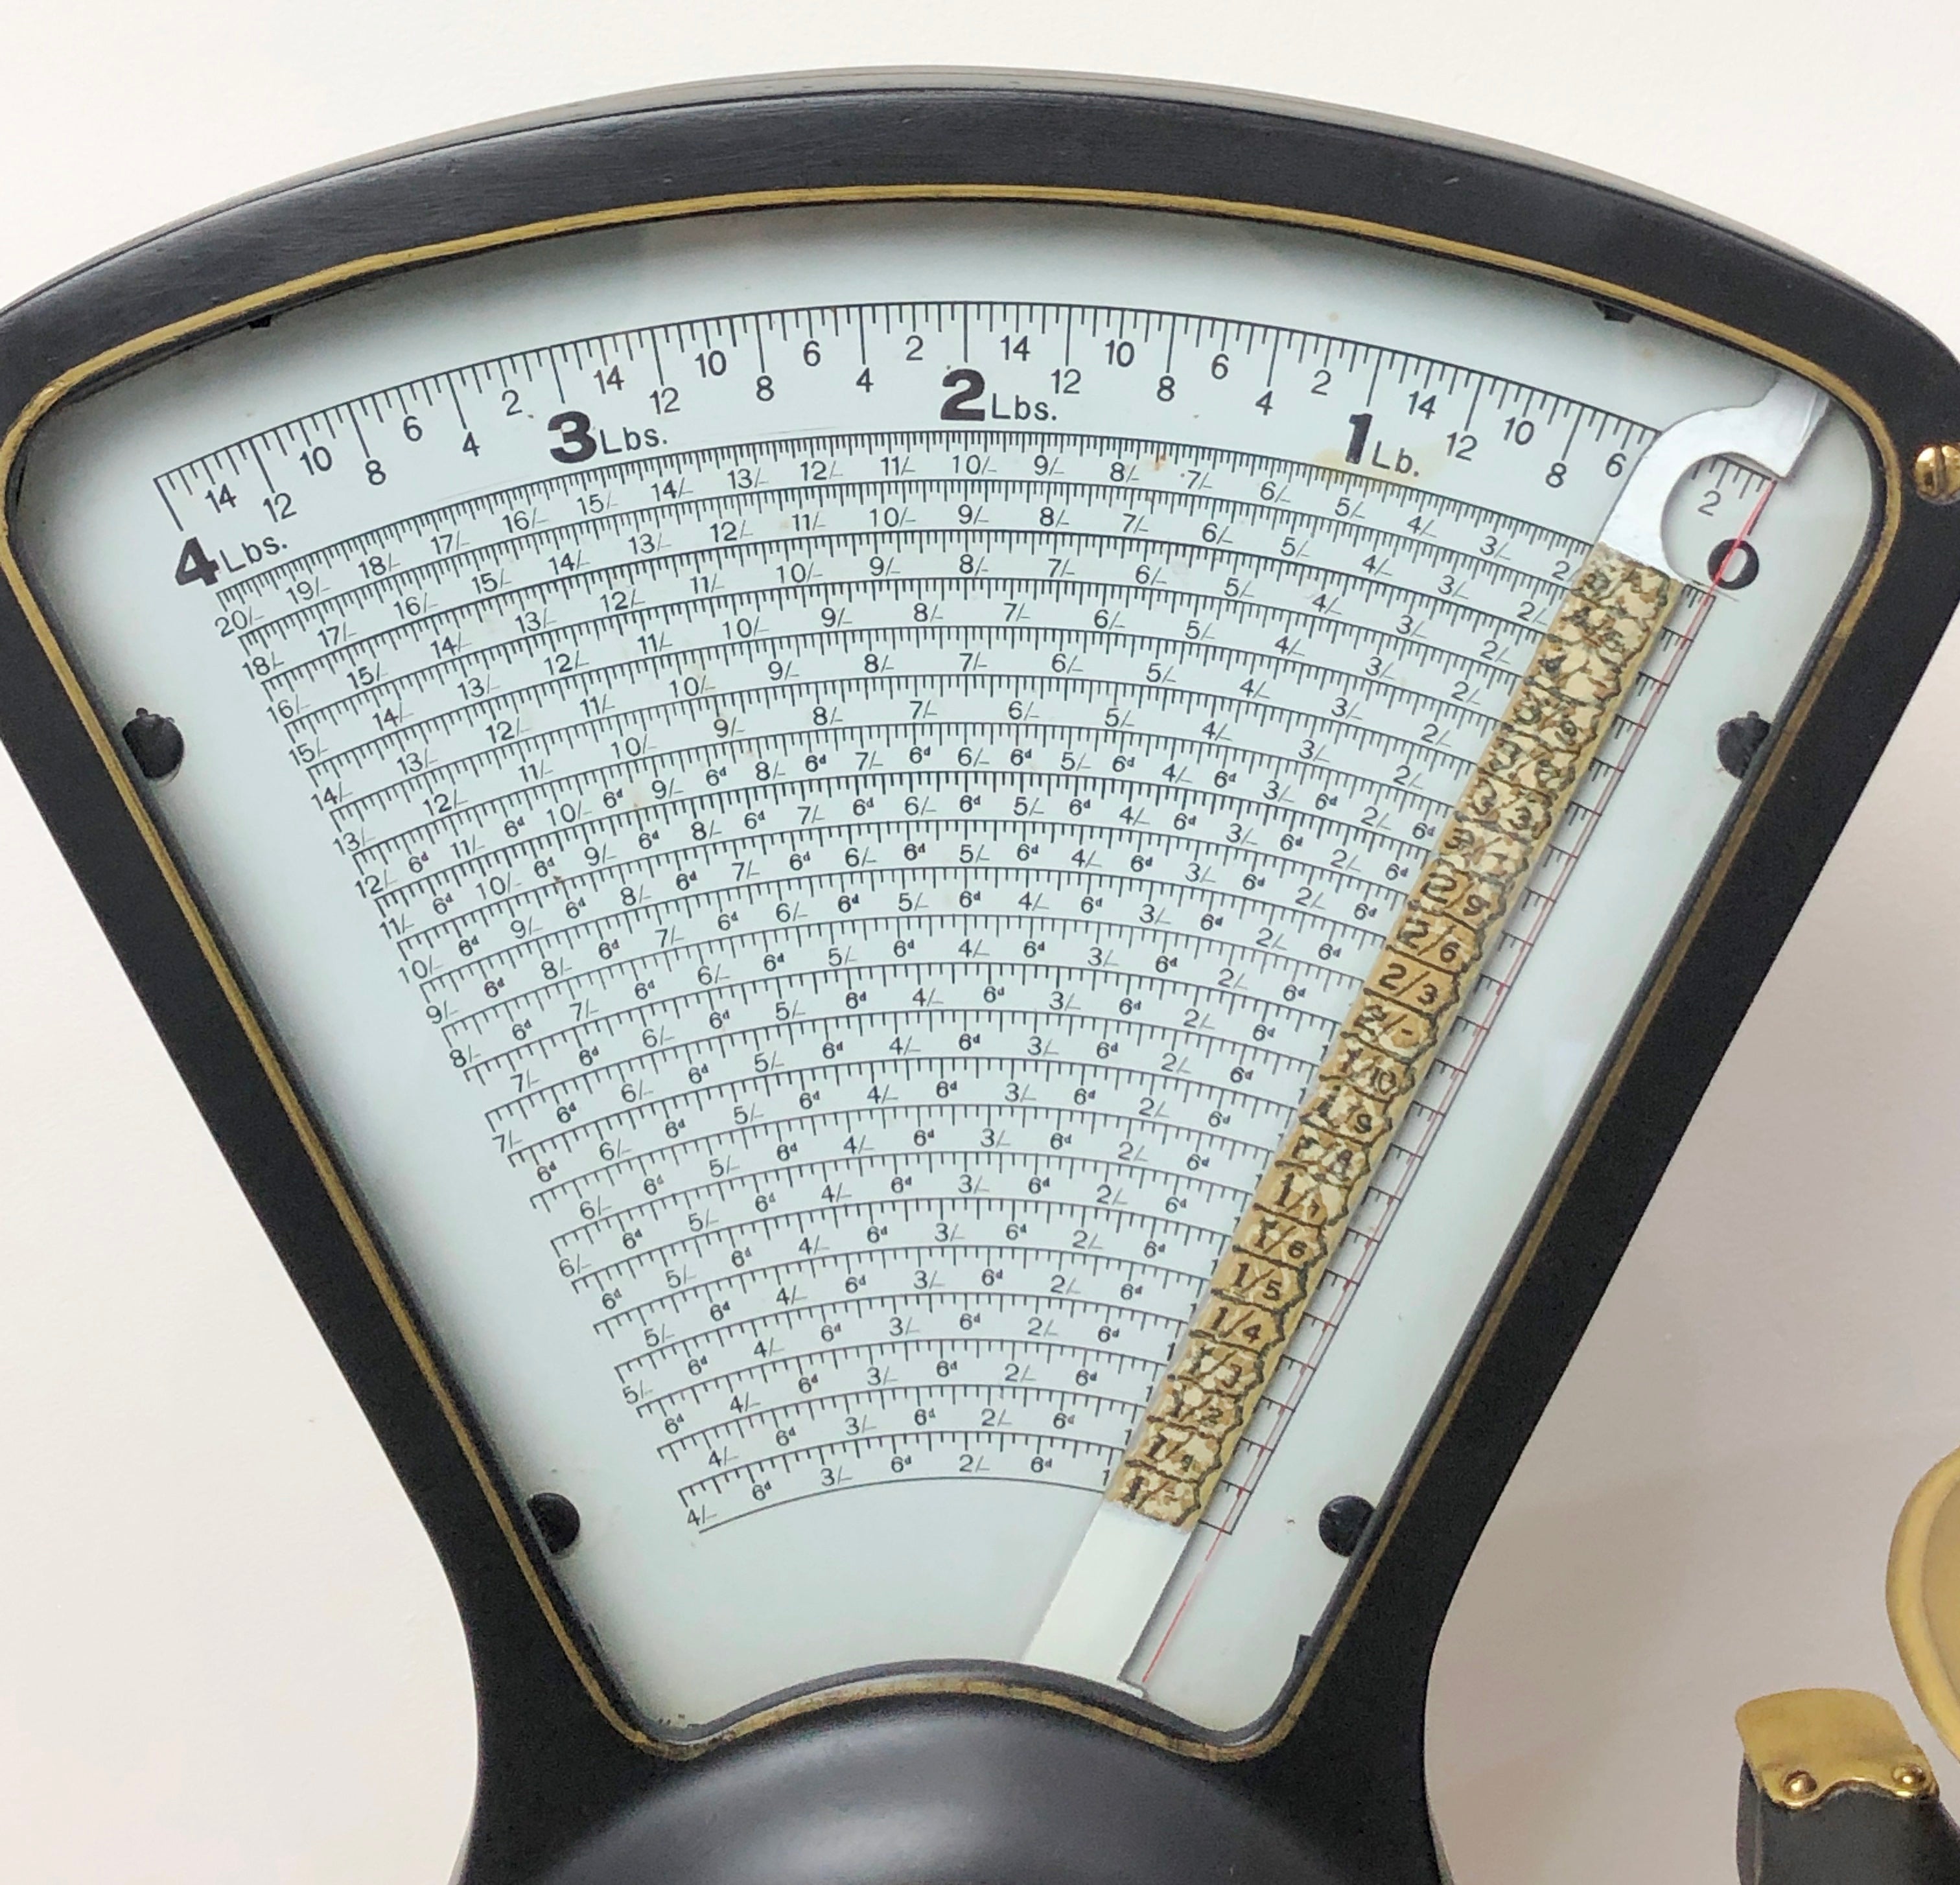 Vintage DAYTON The Computing Co. Double-Sided Kitchen Scale | eXibit collection